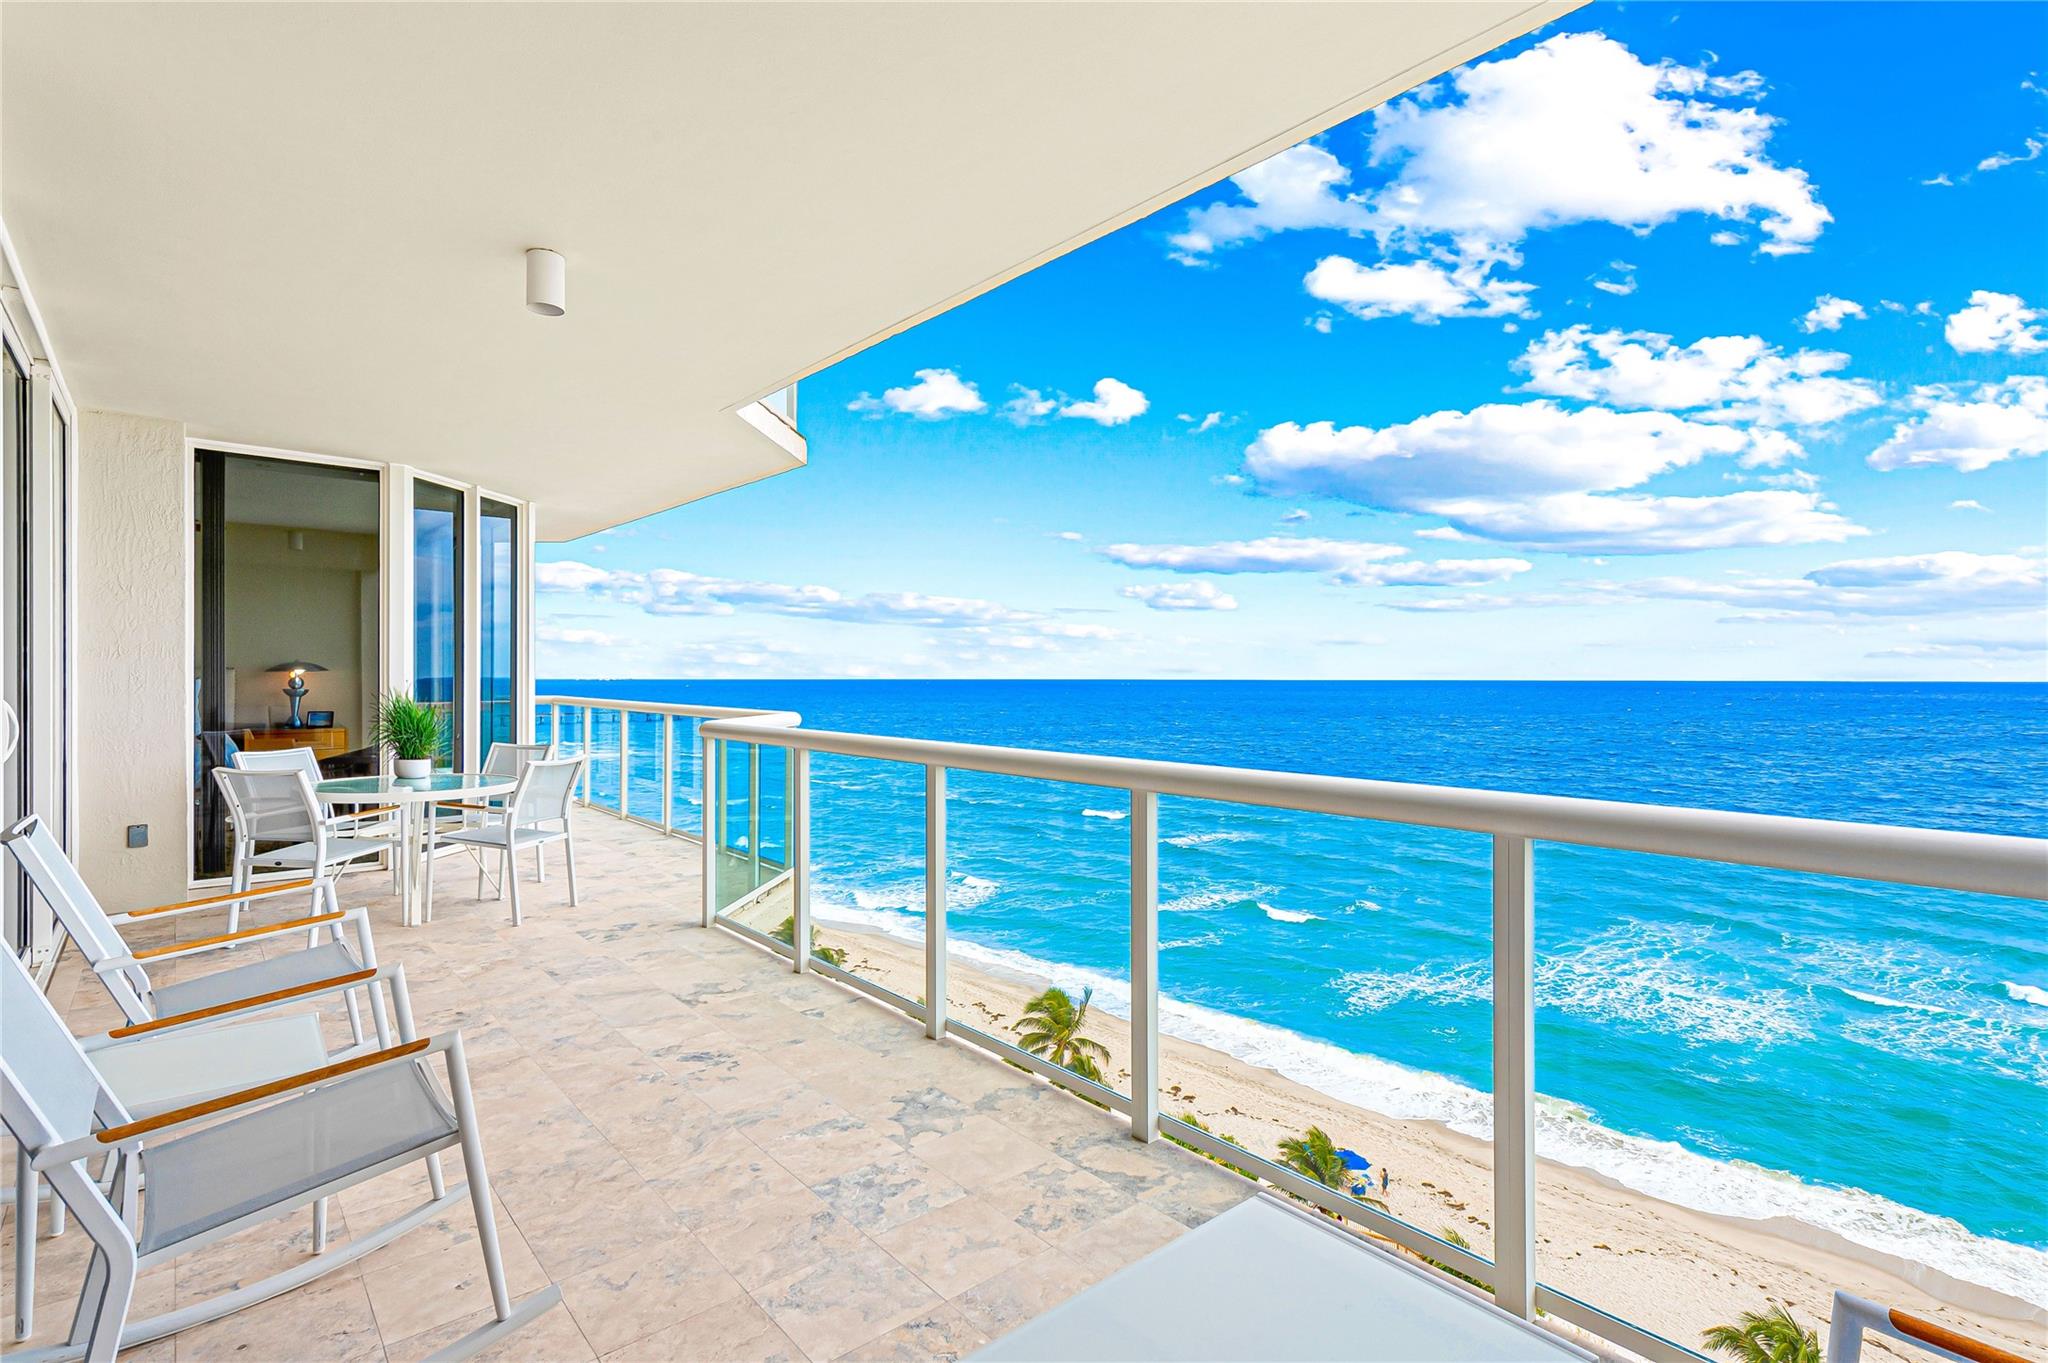 DIRECTLY ON THE SAND W/ SWEEPING OCEAN VIEWS FROM EVERY ROOM! PRIME UNIT FEATURING AN EXPANSIVE BALCONY W/ VIEWS OF THE ATLANTIC OCEAN. FEATURES INCLUDE AN OPEN KITCHEN W/ QUARTZ WATERFALL COUNTERTOPS,FULL BACK SPLASH,UNDER COUNTER LIGHTING,MODERN WHITE CABINETRY,SS APPLIANCES & MARBLE FLOORS. SPLIT BD FLOOR PLAN OFFERING A LARGE PRIMARY SUITE,W/ WALK IN CLOSET,ENSUITE BA W/ DUAL MARBLE VANITIES,DEEP SOAKING TUB & SEPARATE SHOWER,& HOME OFFICE. RESORT STYLE AMENITIES INCLUDE 2 GYMS,SAUNAS,MASSAGE ROOMS,2 HEATED SALINE POOLS & SPA,CABANAS,CAFE,LOUNGE/CLUB ROOM/LIBRARY,TENNIS COURTS,VALET,GUARDED GATE W/ 24-HR SECURITY & CONCIERGE. 8 ACRES OF LUSH LANDSCAPES,PRIVATE GATED COMPLEX,CLOSE TO HOLLYWOOD BOARDWALK,STATE PARK,FTL AIRPORT,LAS OLAS BLVD,MALLS,DINING,CASINOS,RACETRACK, & BIKE TRAILS. DIRECTLY ON THE SAND WITH SWEEPING OCEAN VIEWS FROM EVERY ROOM! LIGHT AND BRIGHT, THIS PRIME UNIT FEATURES AN EXPANSIVE BALCONY WITH ENAMORING VIEWS OF THE ATLANTIC OCEAN. KEY FEATURES INCLUDE AN OPEN KITCHEN WITH QUARTZ WATERFALL COUNTERTOPS, FULL BACK SPLASH, UNDER COUNTER LIGHTING, MODERN WHITE CABINETRY, STAINLESS APPLIANCES AND MARBLE FLOORS. THOUGHTFULLY DESIGNED, THIS SPLIT BEDROOM FLOOR PLAN OFFERS A LARGE PRIMARY SUITE, WITH A CUSTOM WALK IN CLOSET, ENSUITE BATH WITH DUAL MARBLE VANITIES, DEEP SOAKING TUB AND SEPARATE GLASS ENCLOSED SHOWER.  NOT TO BE MISSED, THE HOME OFFICE IS PERFECT FOR THE MODERN LIFESTYLE OF WORKING FROM HOME. RESORT STYLE AMENITIES INCLUDE 2 GYMS, SAUNAS, MASSAGE ROOMS, 2 HEATED SALINE POOLS AND SPA, CABANAS, CAFE, LOUNGE/CLUB ROOM/LIBRARY, TENNIS COURTS, VALET, GUARDED GATE WITH 24-HOUR SECURITY & CONCIERGE. 8 ACRES OF LUSH LANDSCAPES ALL LOCATED WITHIN A PRIVATE GATED COMPLEX. TRULY ONE OF A KIND! LOCATION, LOCATION, LOCATION CLOSE TO HOLLYWOOD BOARDWALK, STATE PARK, FORT LAUDERDALE AIRPORT, LAS OLAS BOULEVARD, MALLS, DINING, CASINOS, RACETRACK, OUTDOOR MUSIC VENUES & BIKE TRAILS.